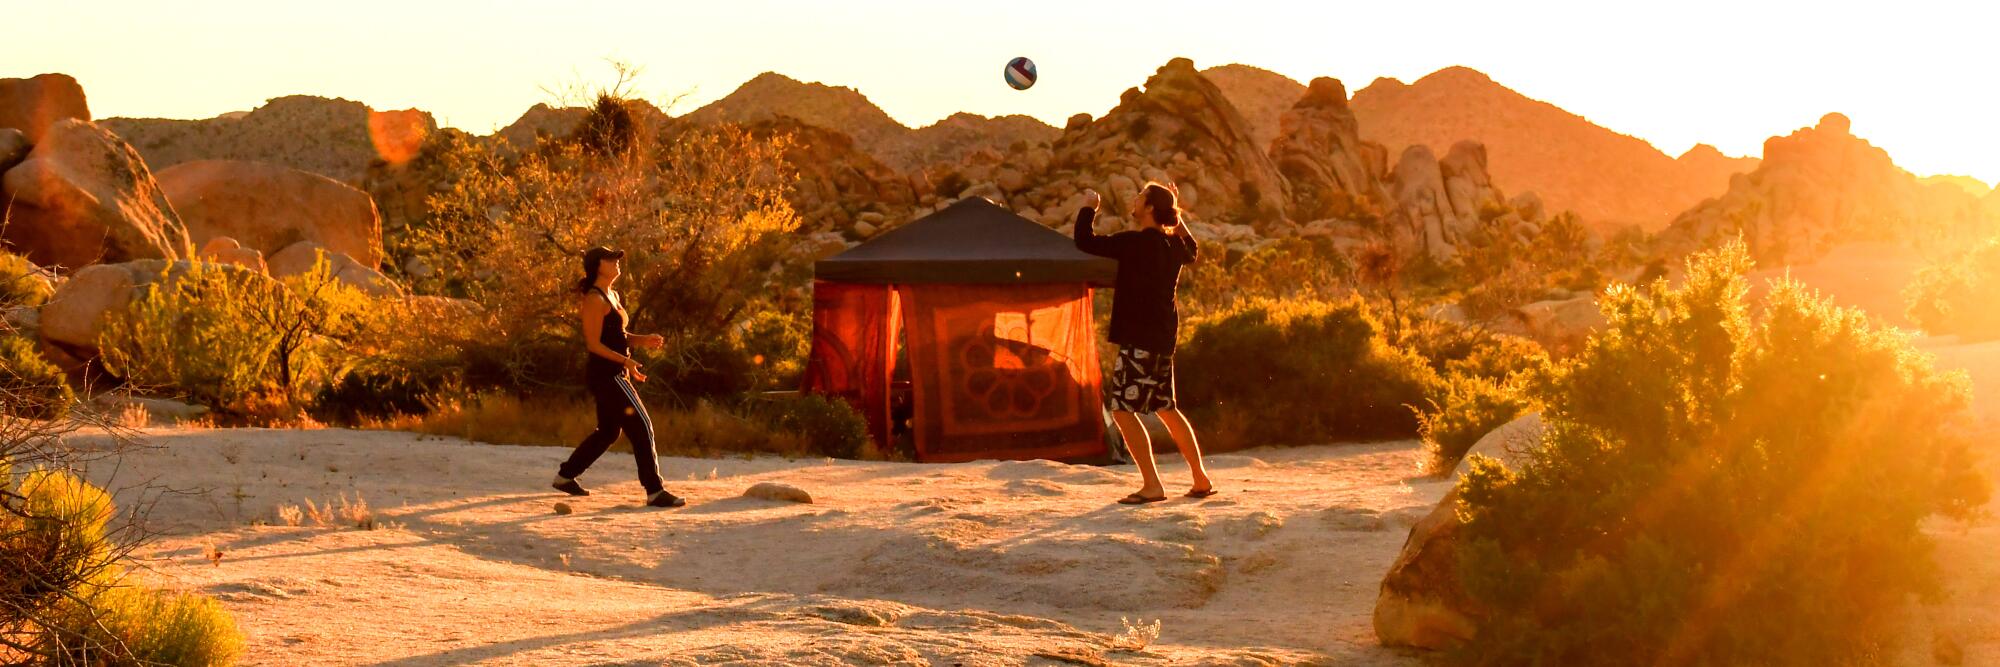 Jumbo Rocks Campground, Joshua Tree National Park, with people playing with a ball and a tent in front of rocky hills.